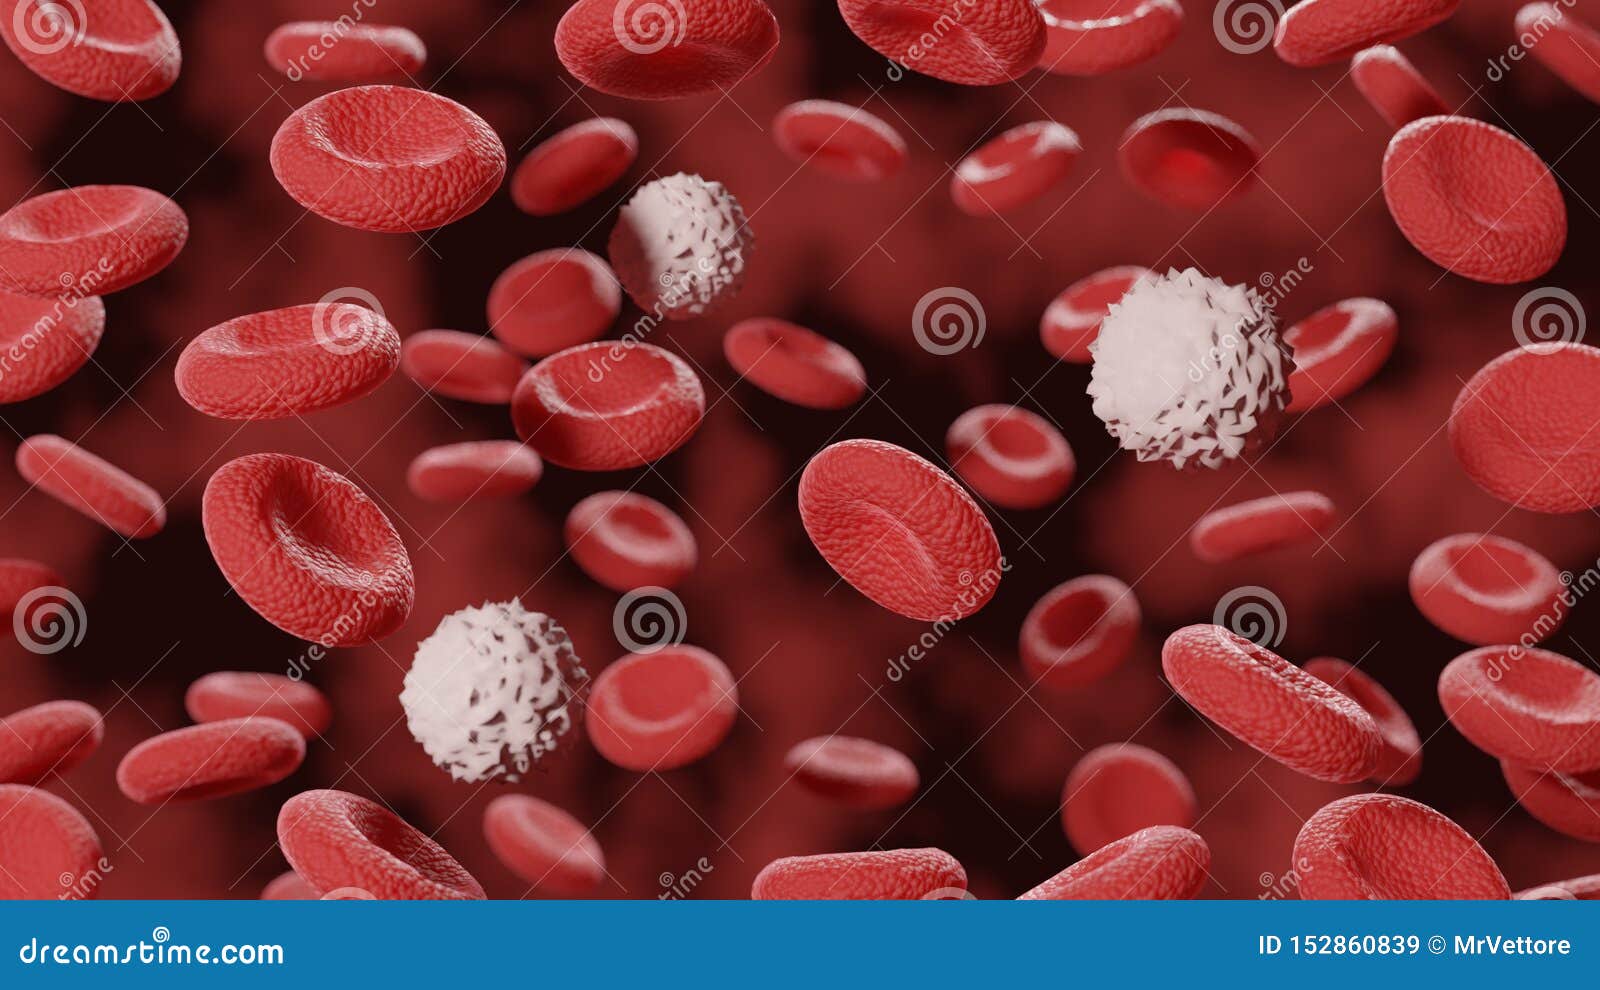 red blood cells stream in vein. abstract white blood cell in vena. microscope closeup view. science 3d 